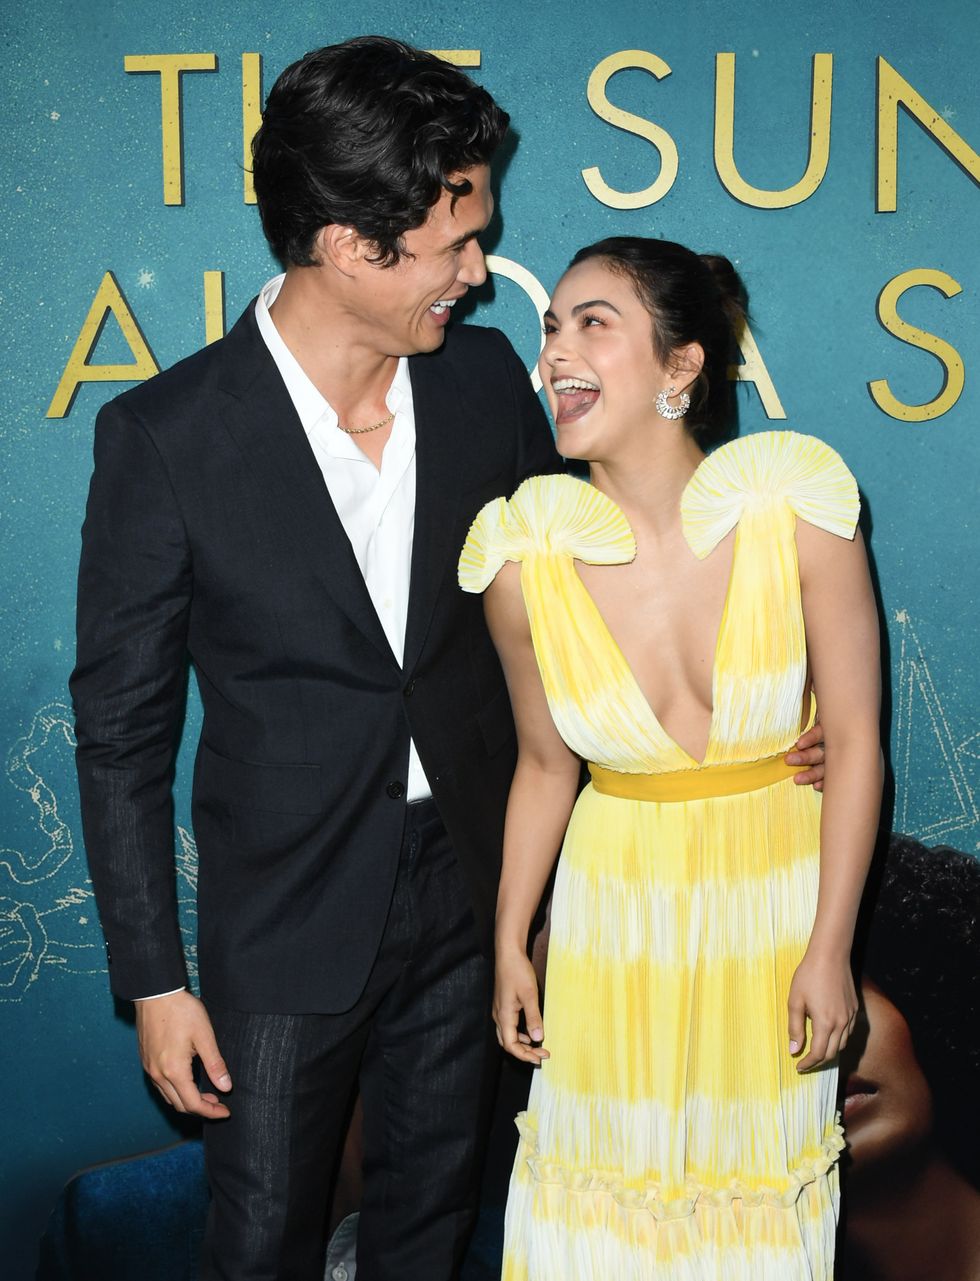 los angeles, california may 13 charles melton and camila mendes attend the world premiere of warner bros the sun is also a star at pacific theaters at the grove on may 13, 2019 in los angeles, california photo by jon kopaloffgetty images,